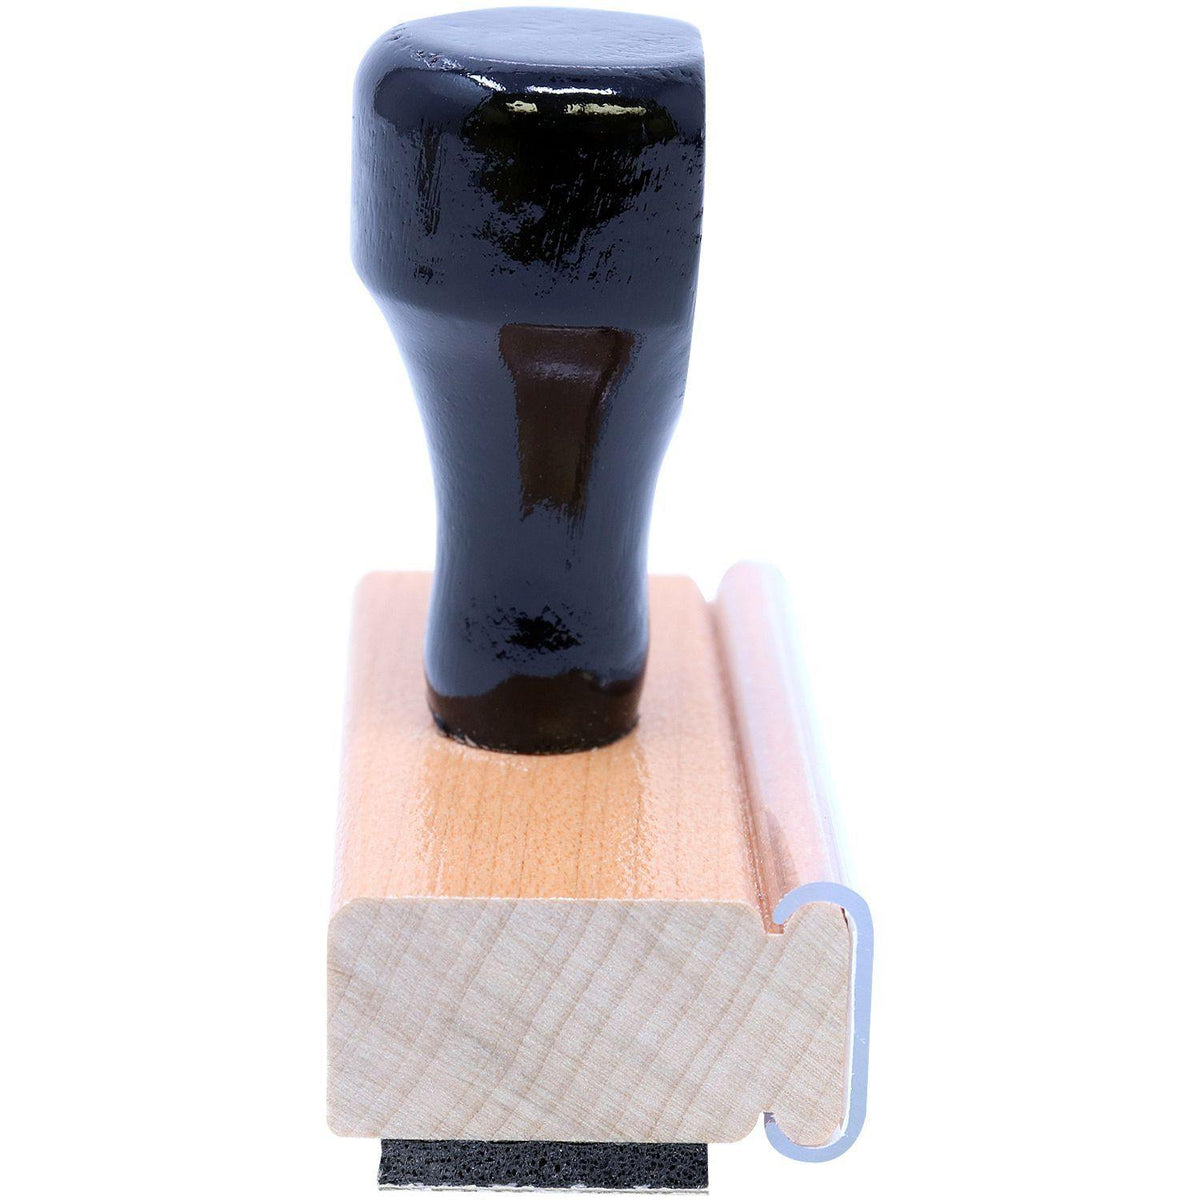 Late Rubber Stamp - Engineer Seal Stamps - Brand_Acorn, Impression Size_Small, Stamp Type_Regular Stamp, Type of Use_Teacher